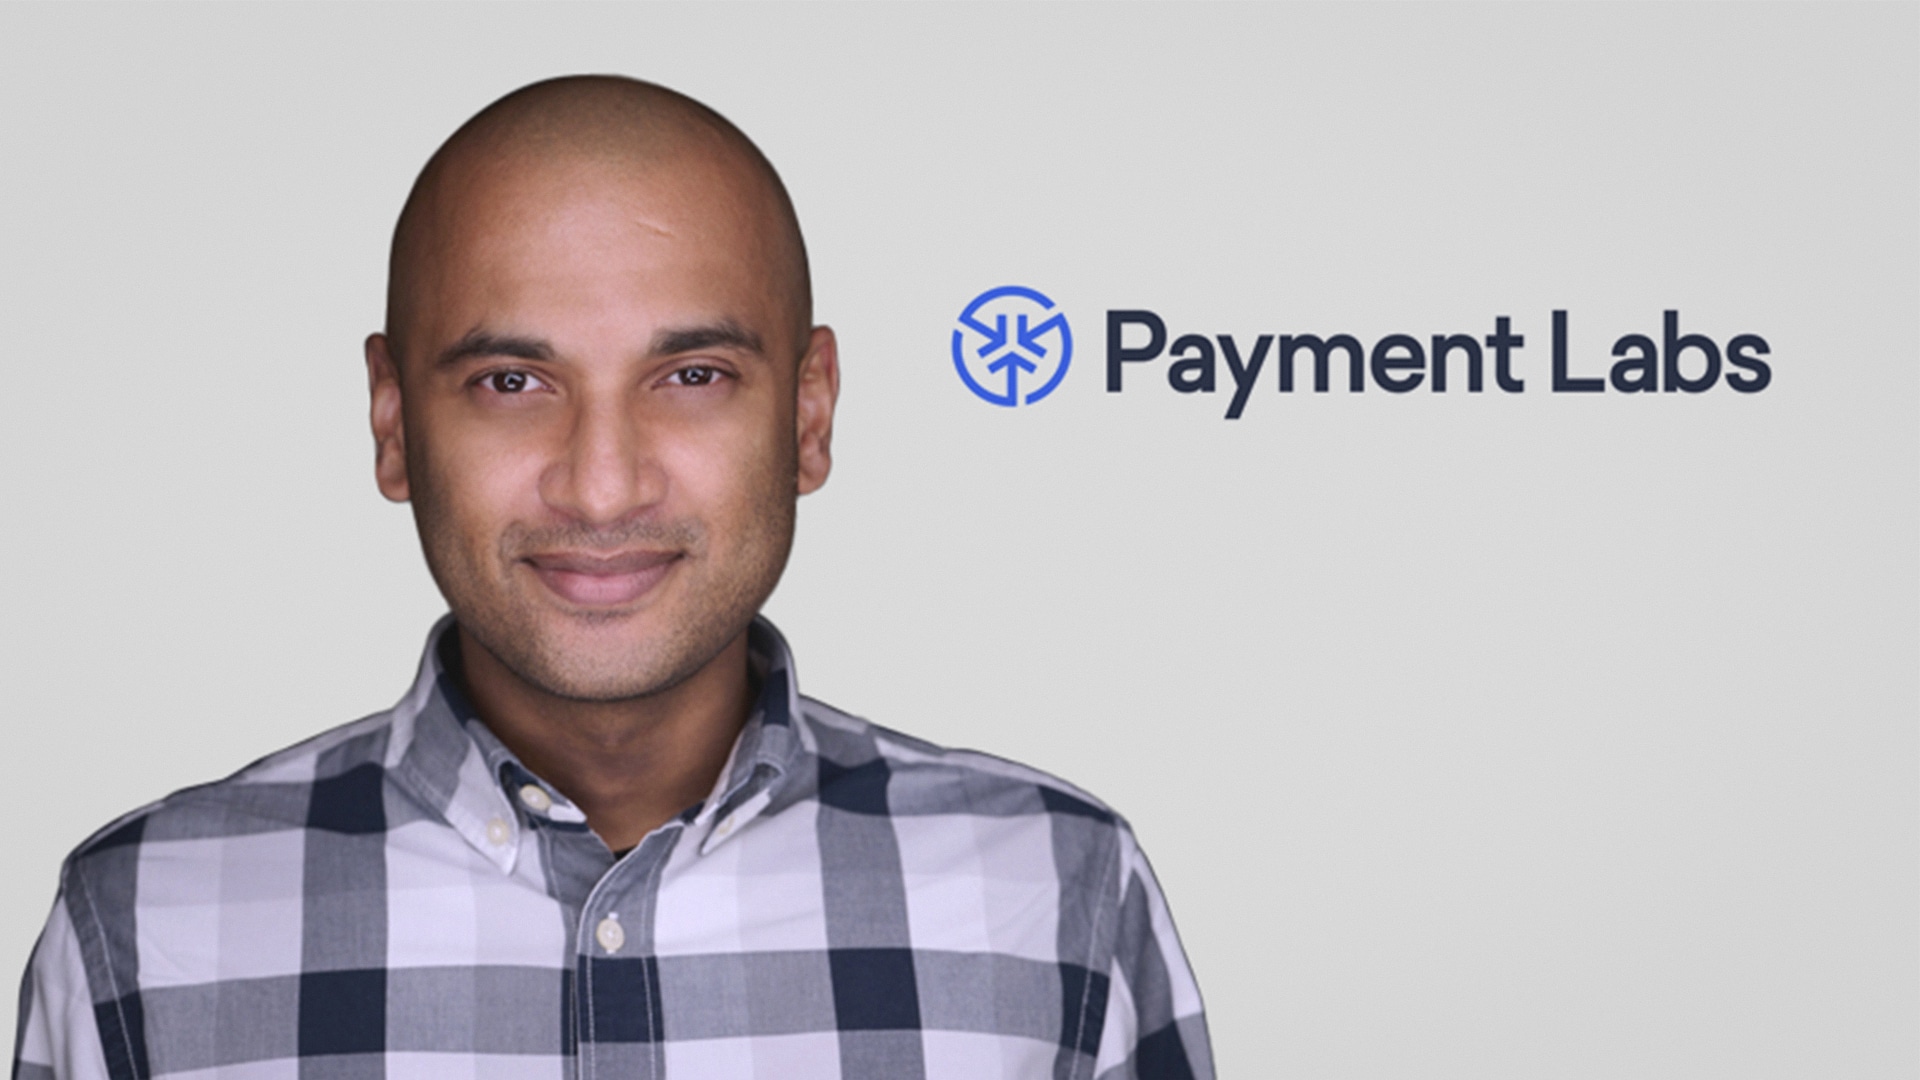 The Journey to Build the Payment Labs Platform: Interview With Ronak Desai, Co-Founder & CTO